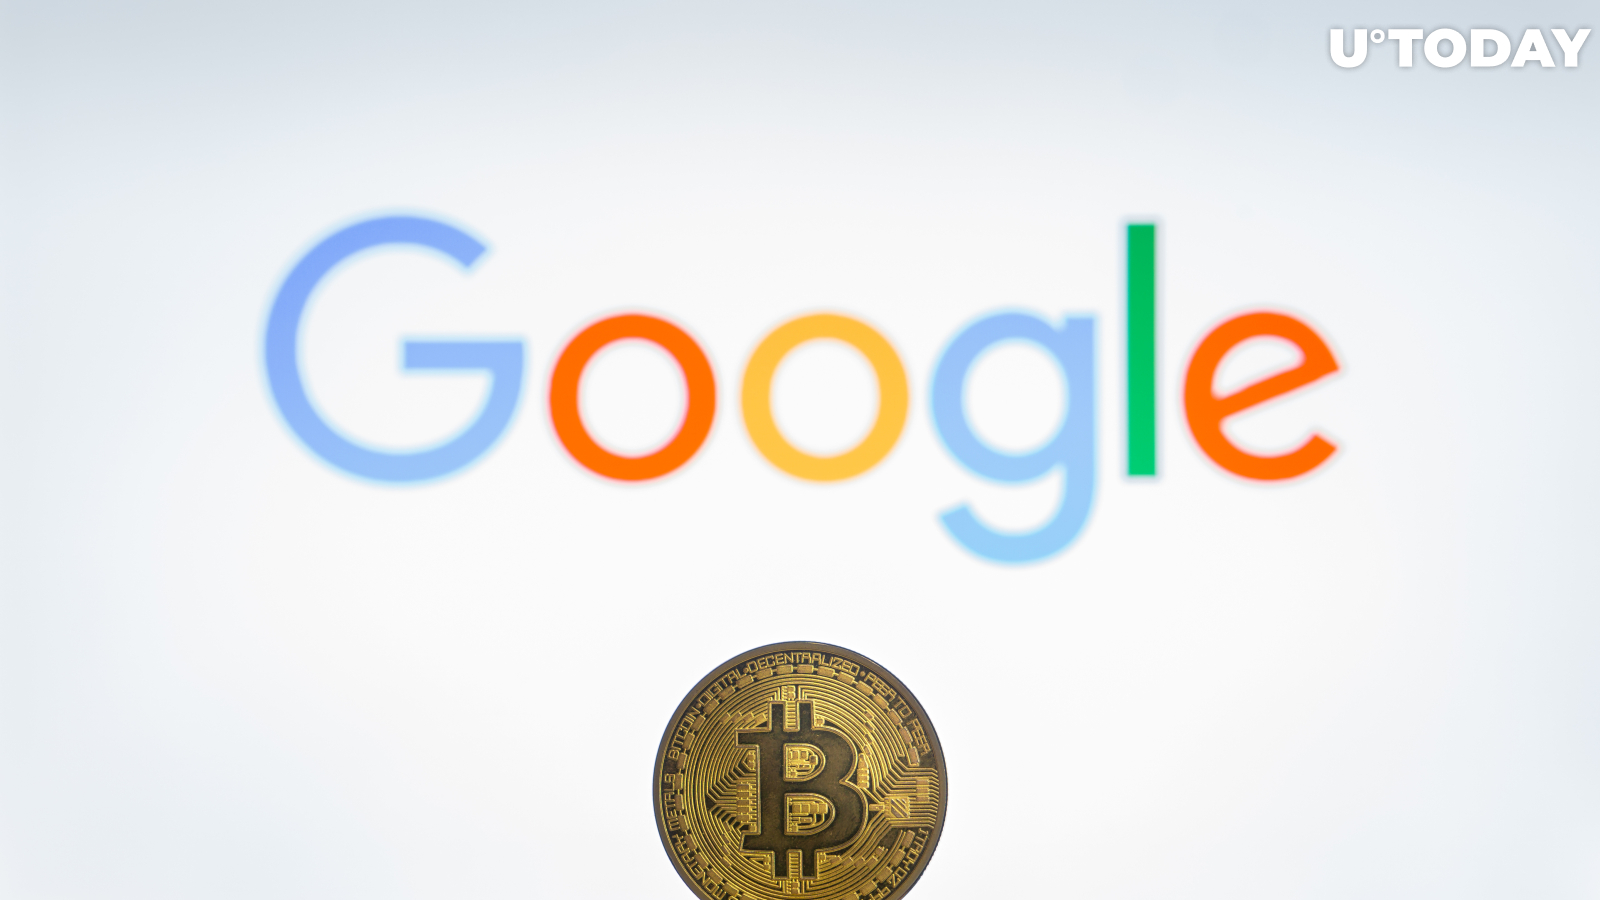 Bitcoin, Ethereum, XRP and Other Coins Surpass Google 